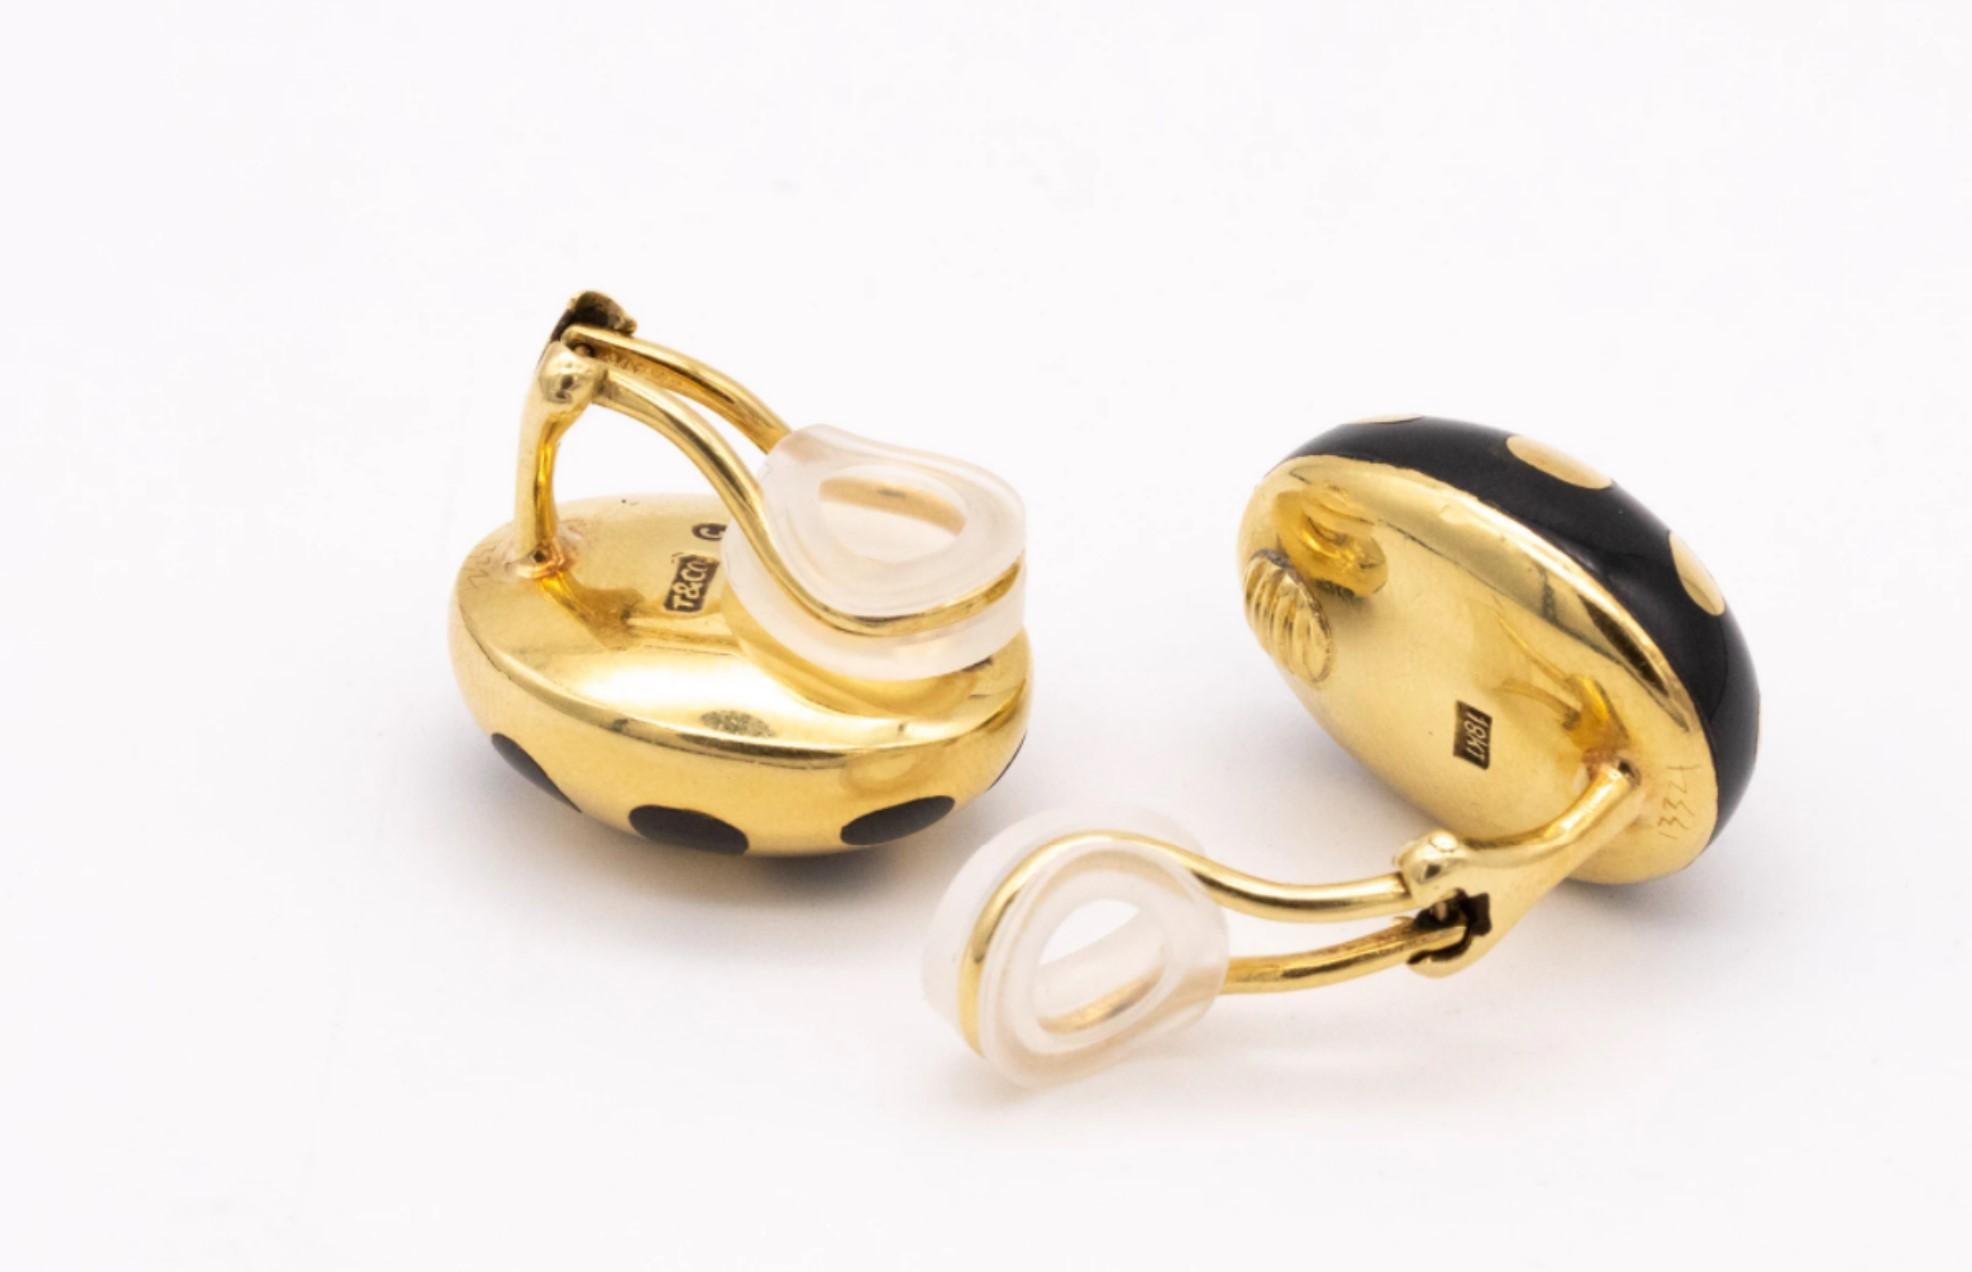 Tiffany Co. 1970 Angela Cummings Positive Negative Earrings 18kt Gold Black Jade In Excellent Condition For Sale In Miami, FL